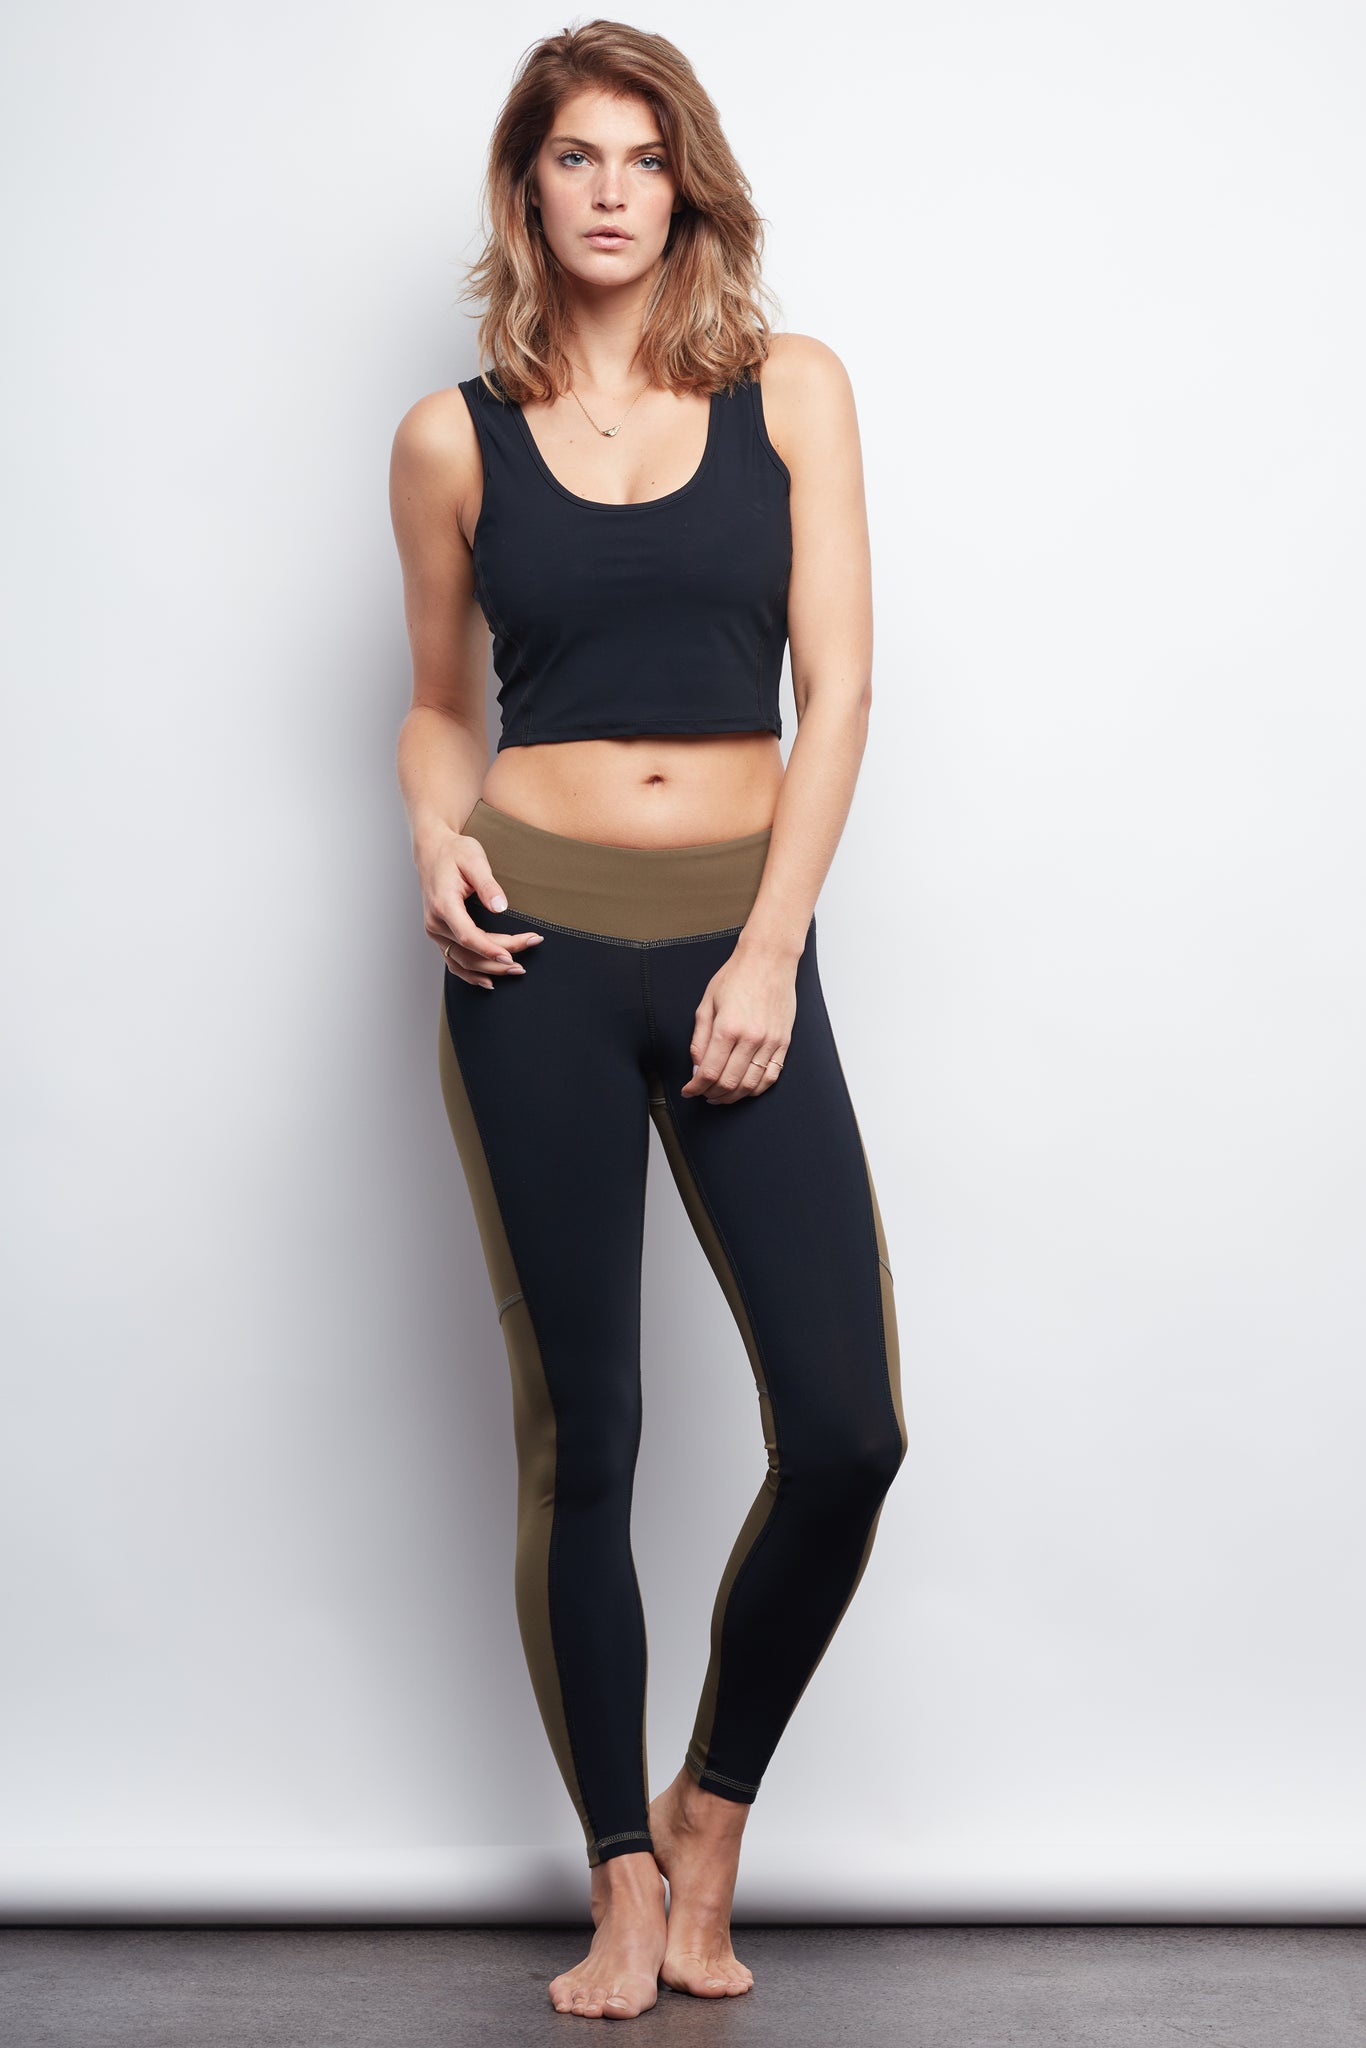 Army/Black Two-Tone Legging - Haven Collective